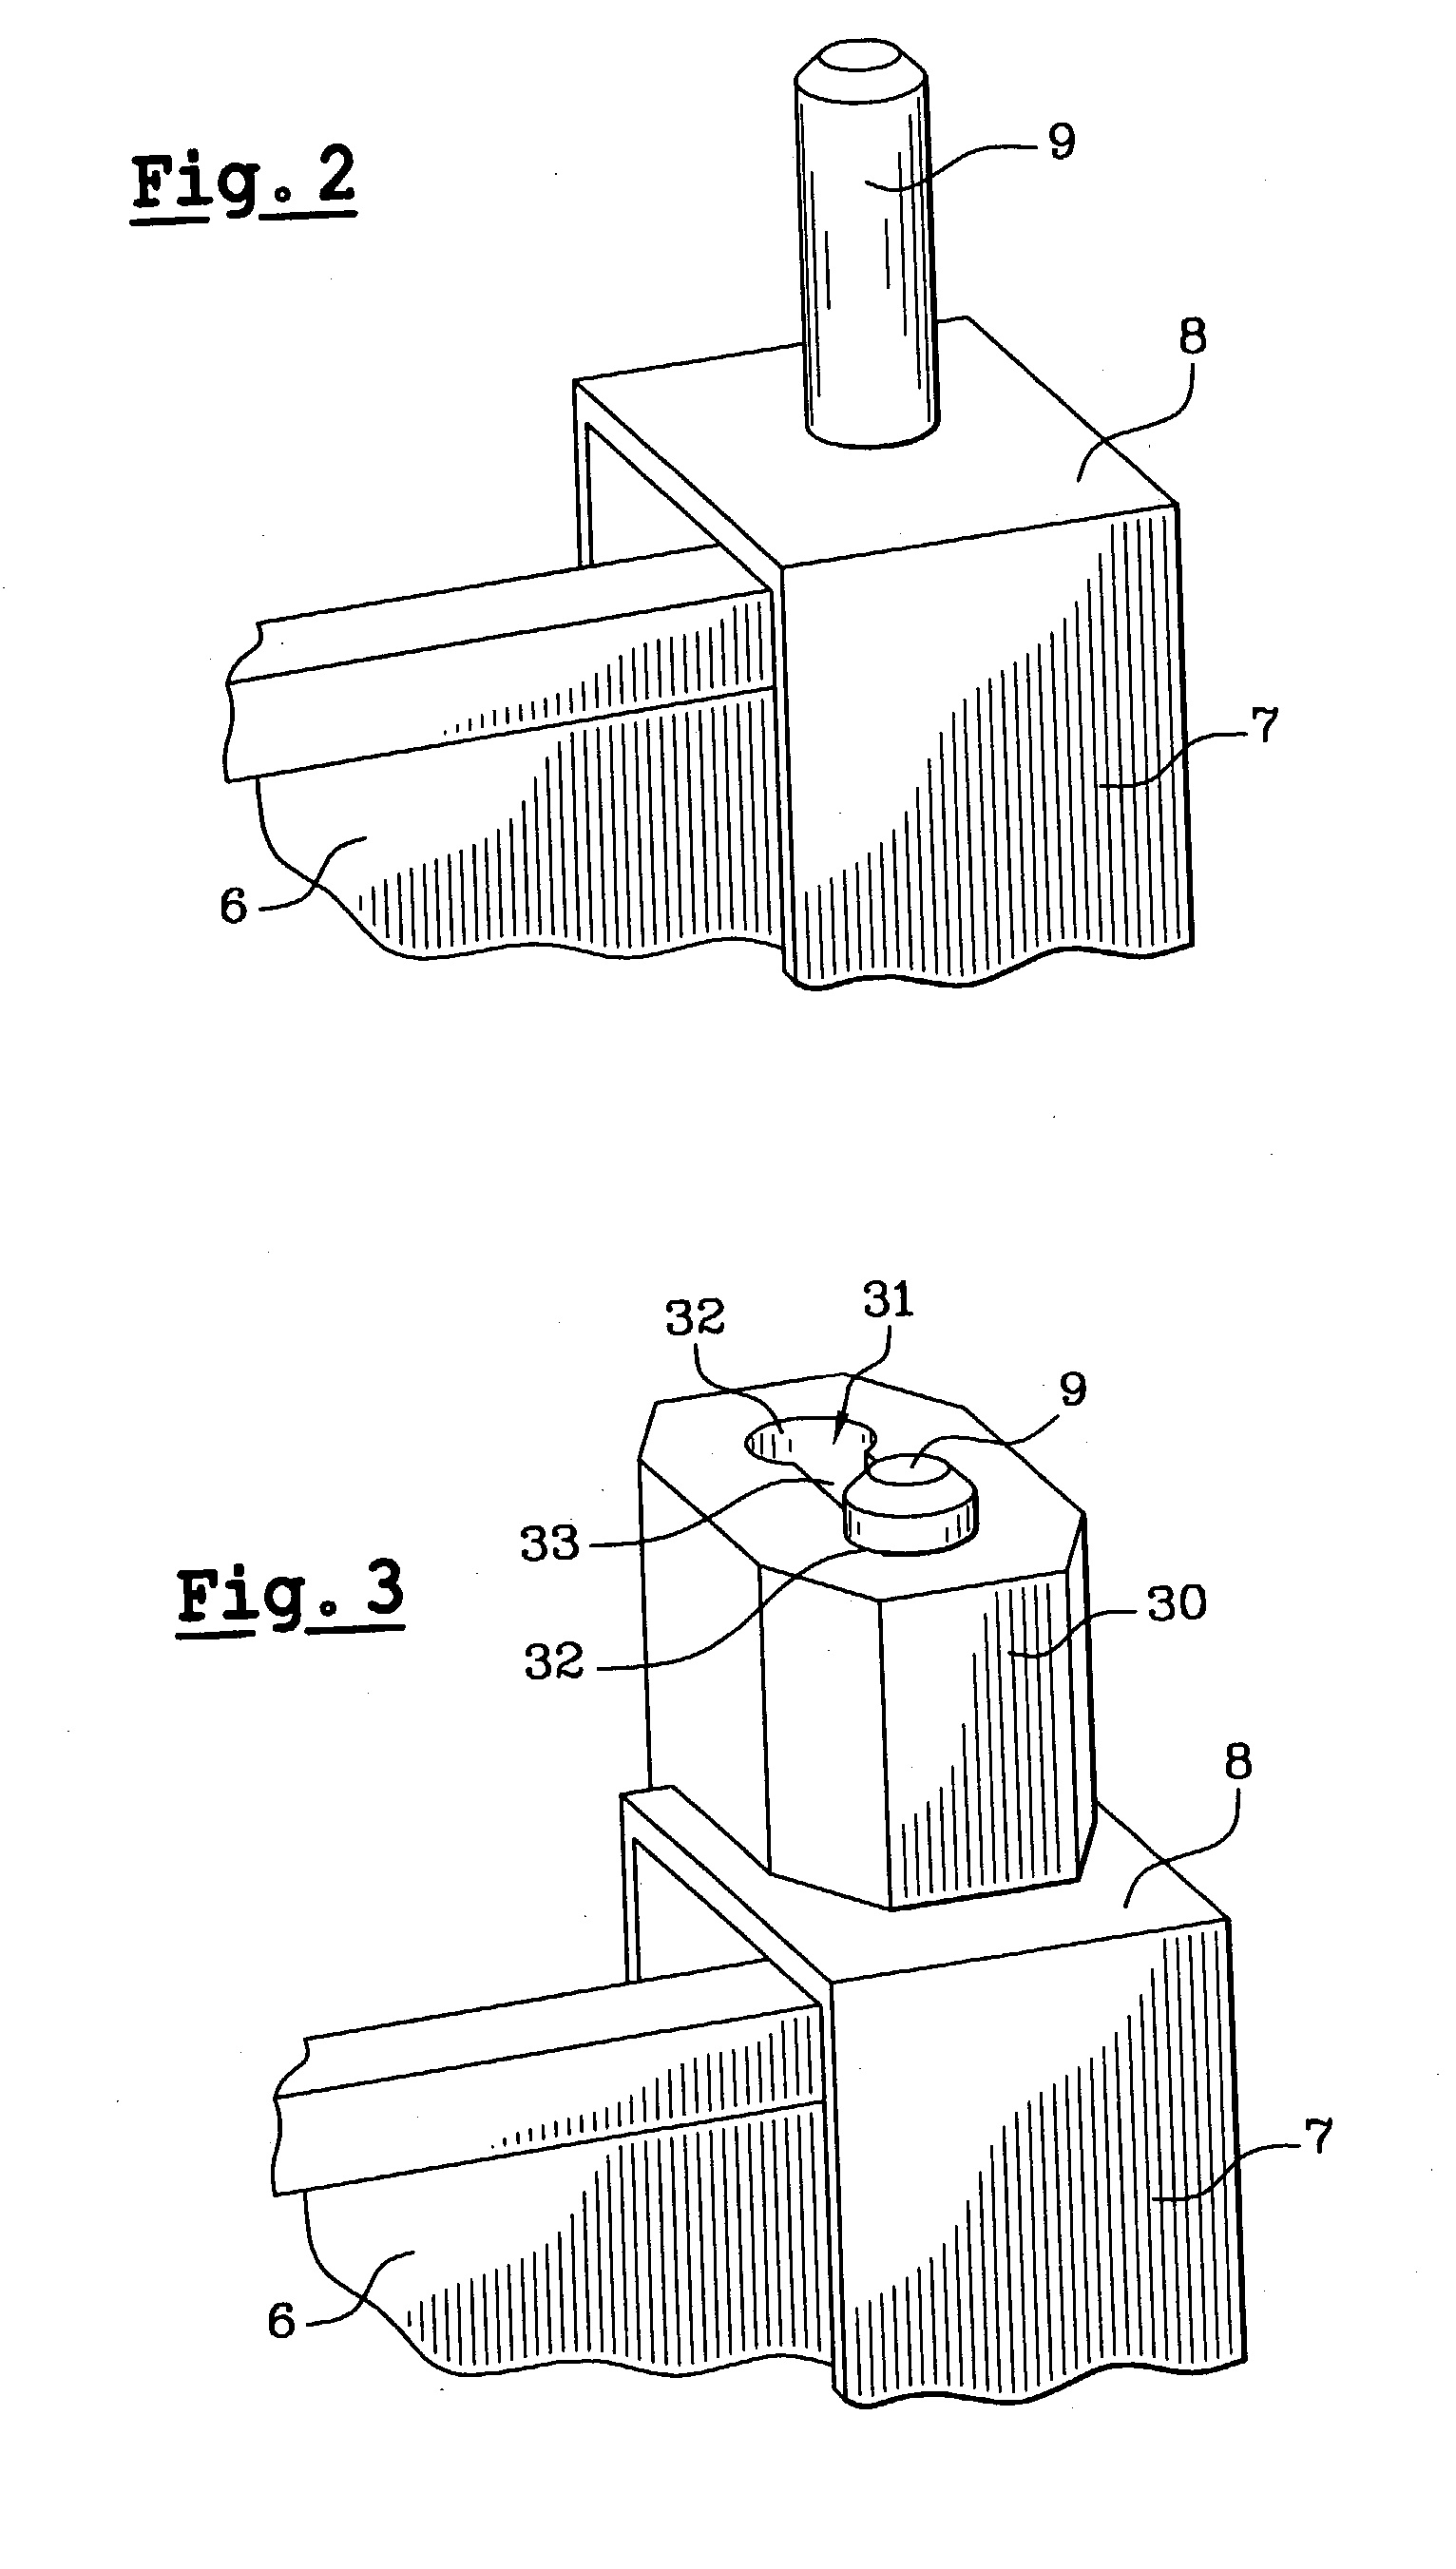 Device for fixing a functional member to a structural part of a motor vehicle, and a structural part including a portion of such a device